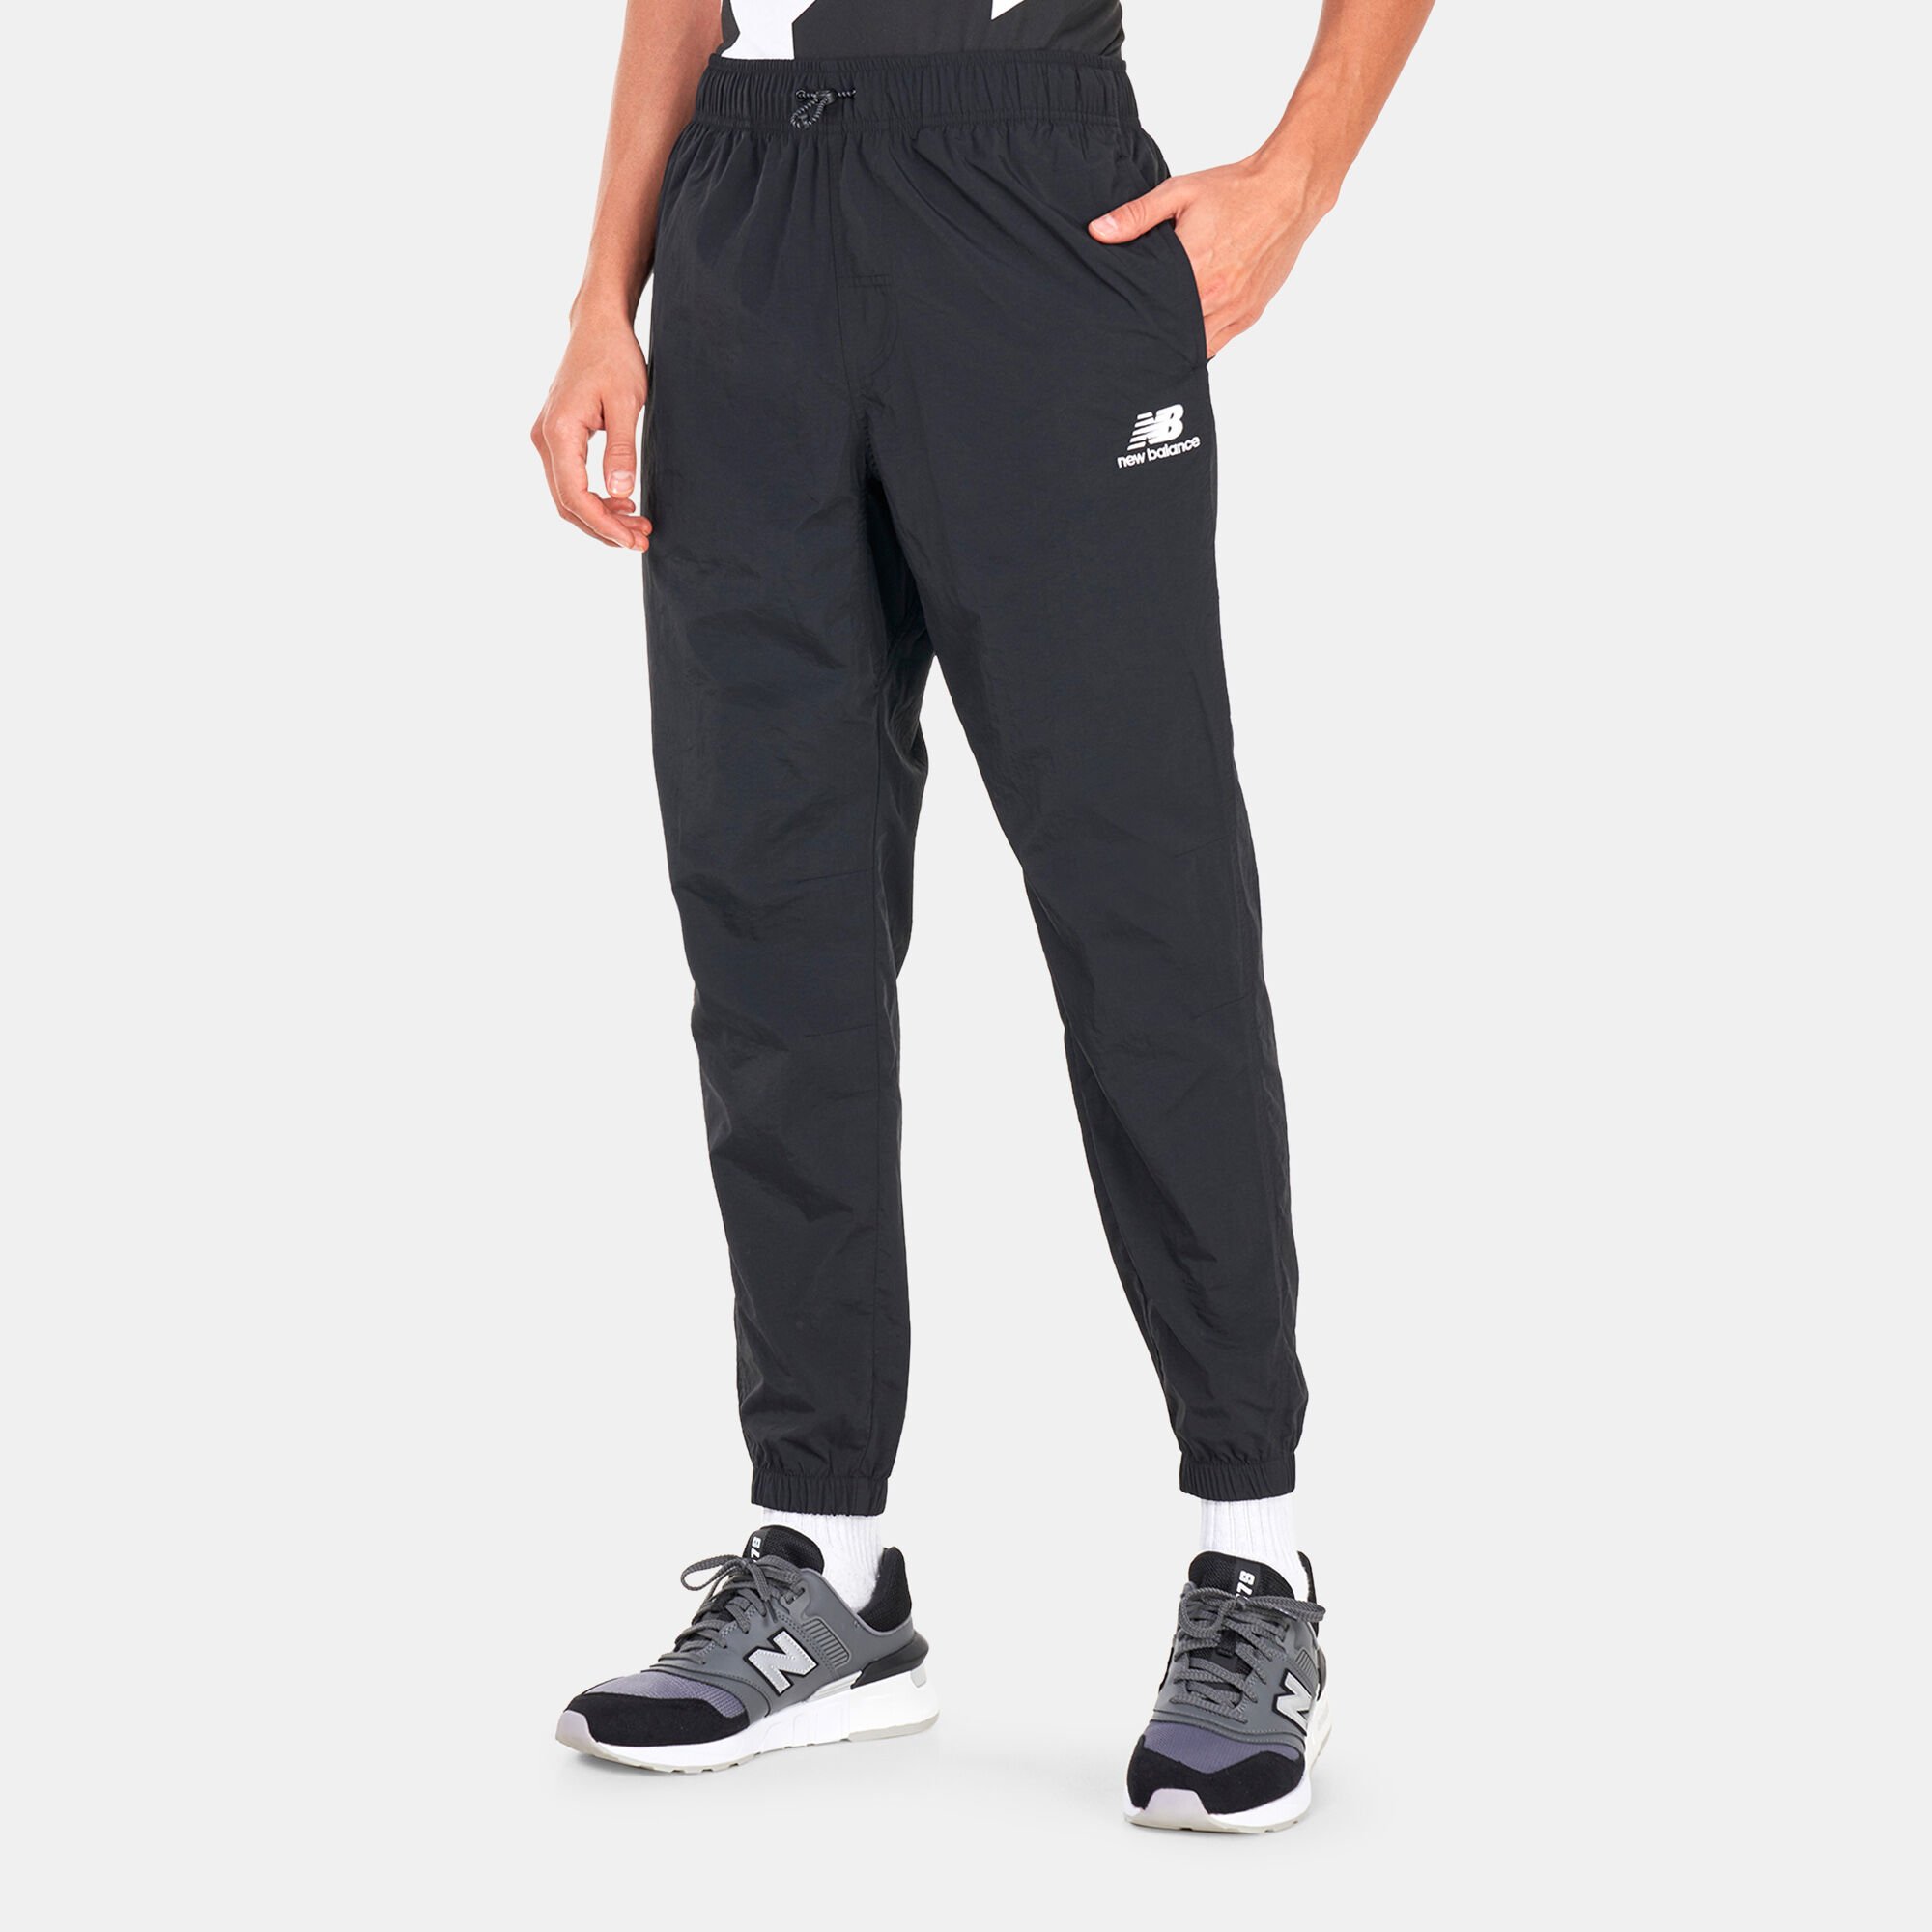 Under Armour Academy Sportstyle Wind Pants  Men  Best Price and Reviews   Zulily